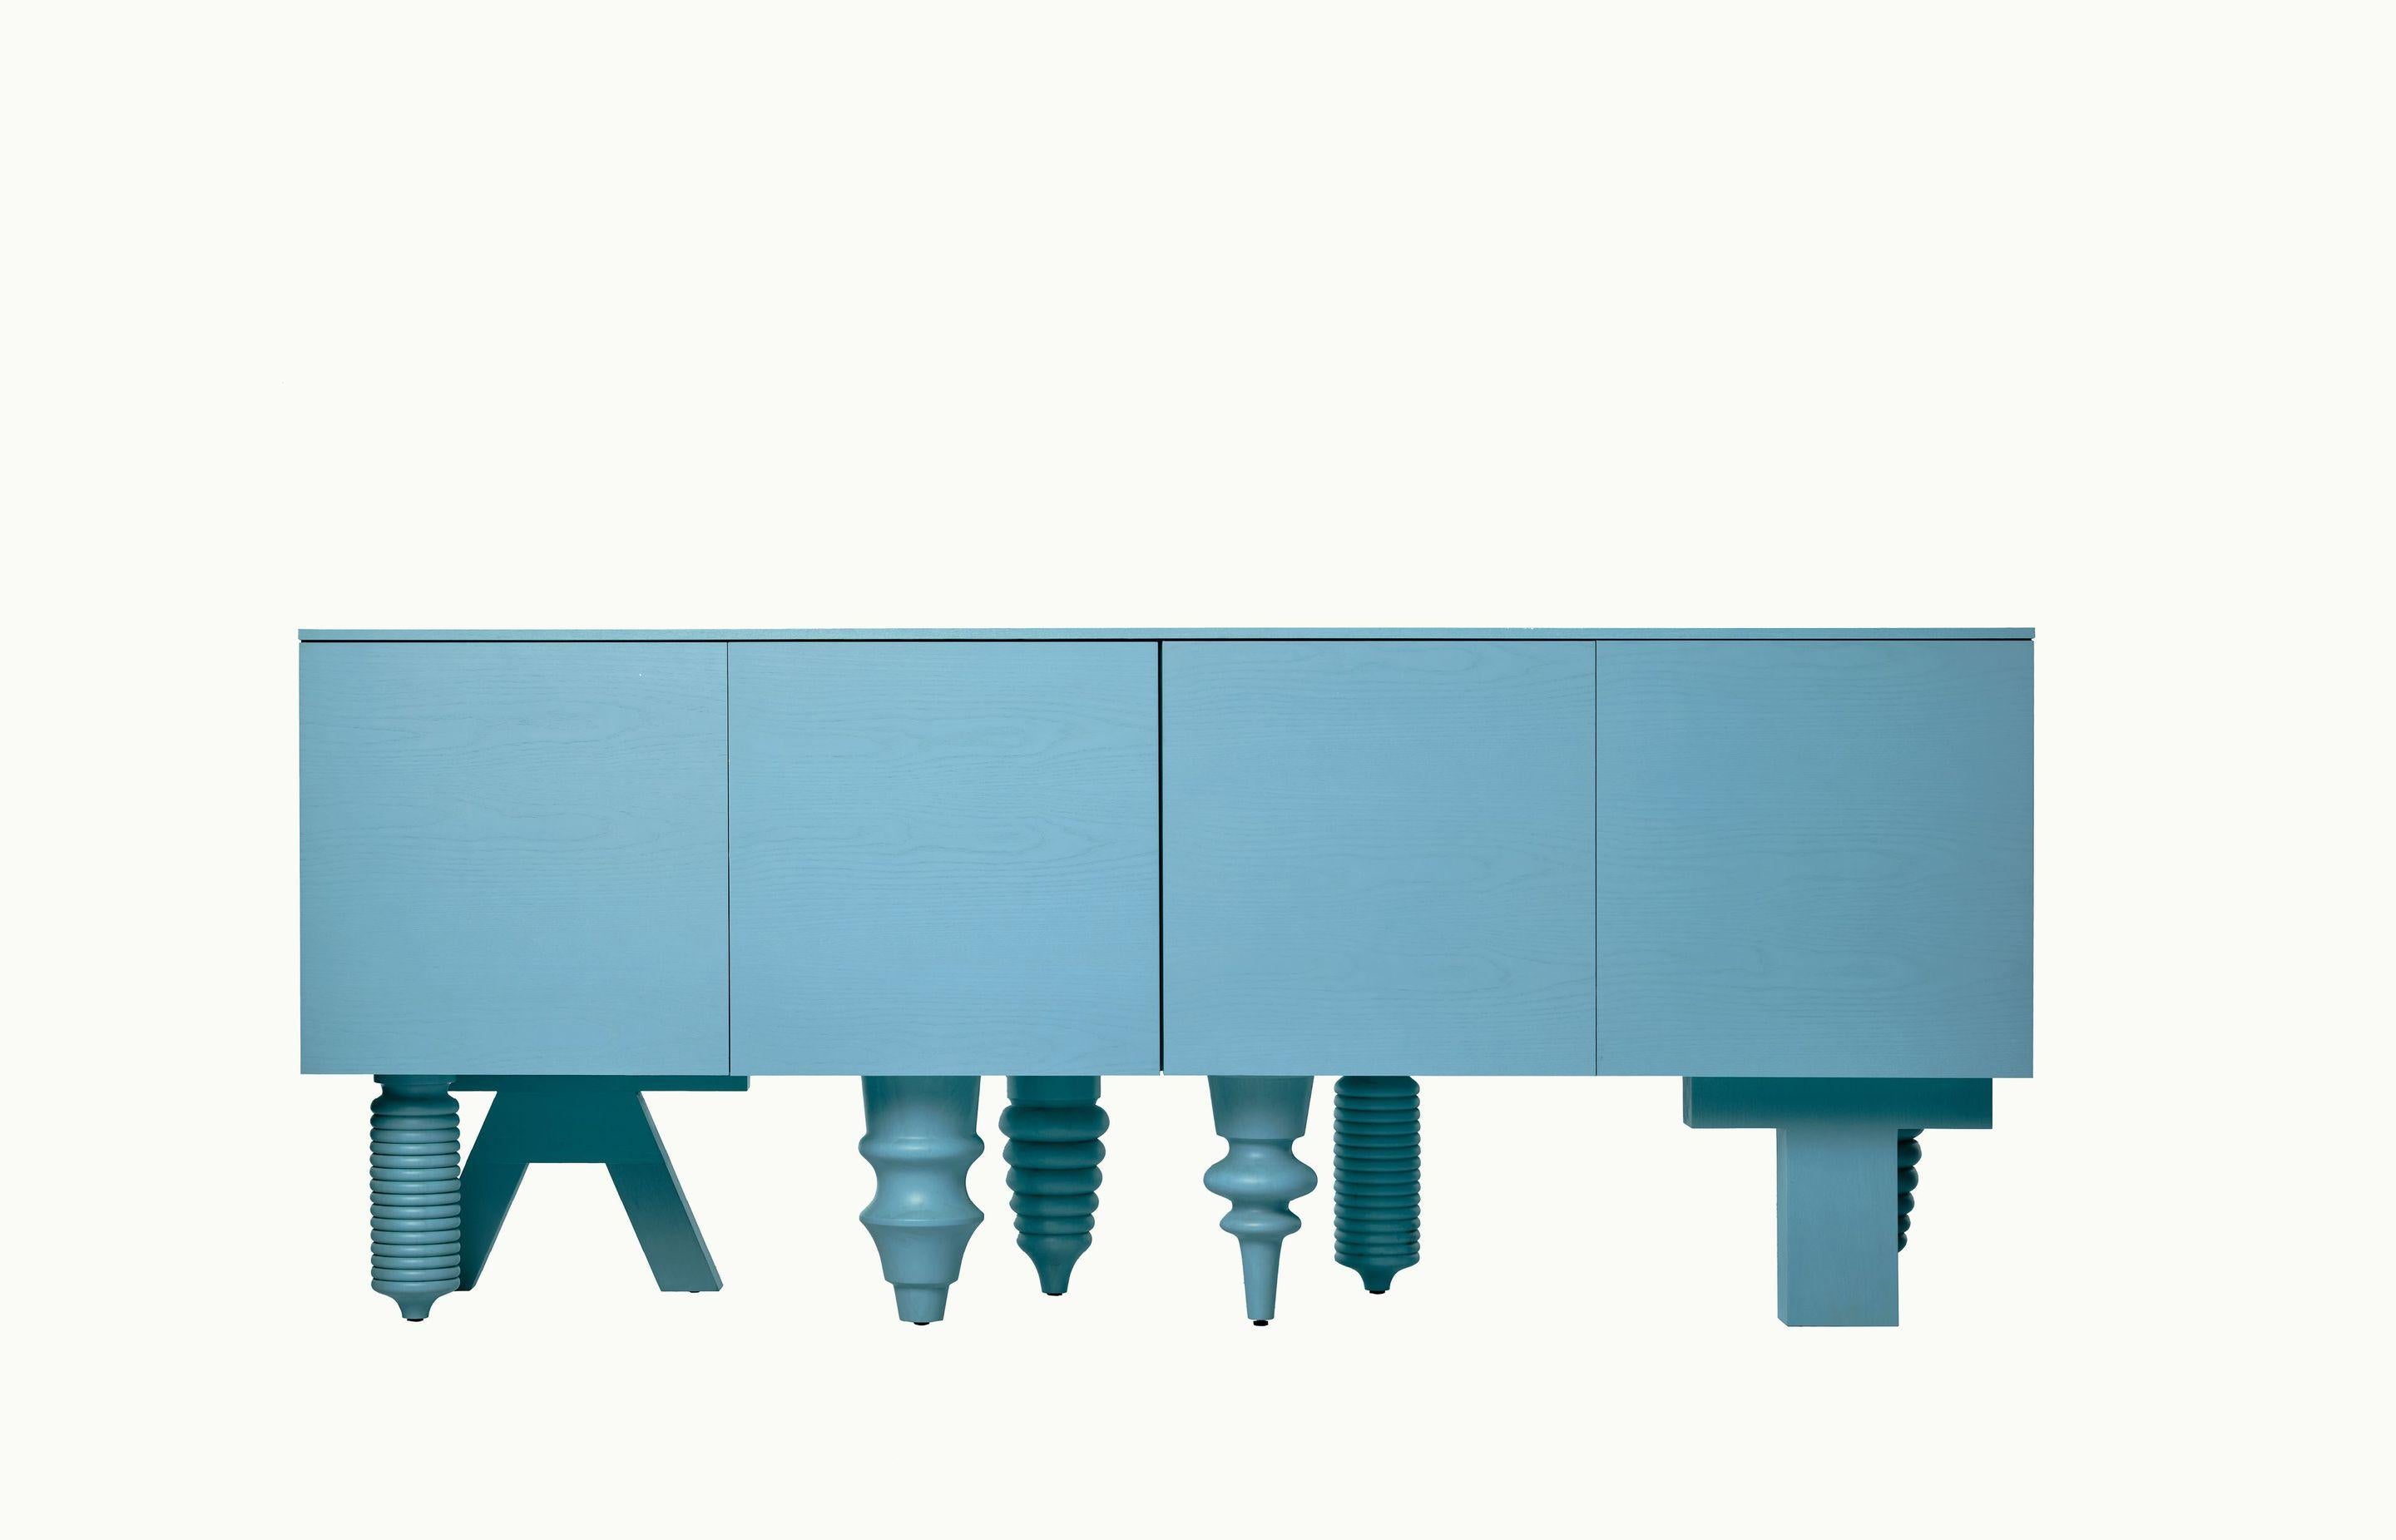 2M Multileg Cabinet in Blue Ash by Jaime Hayon for BD Barcelona

It can be uniquely configured with twelve elaborate leg options, customisable finishes and colours, and a multitude of interior storage variations. The Multileg is disciplined and